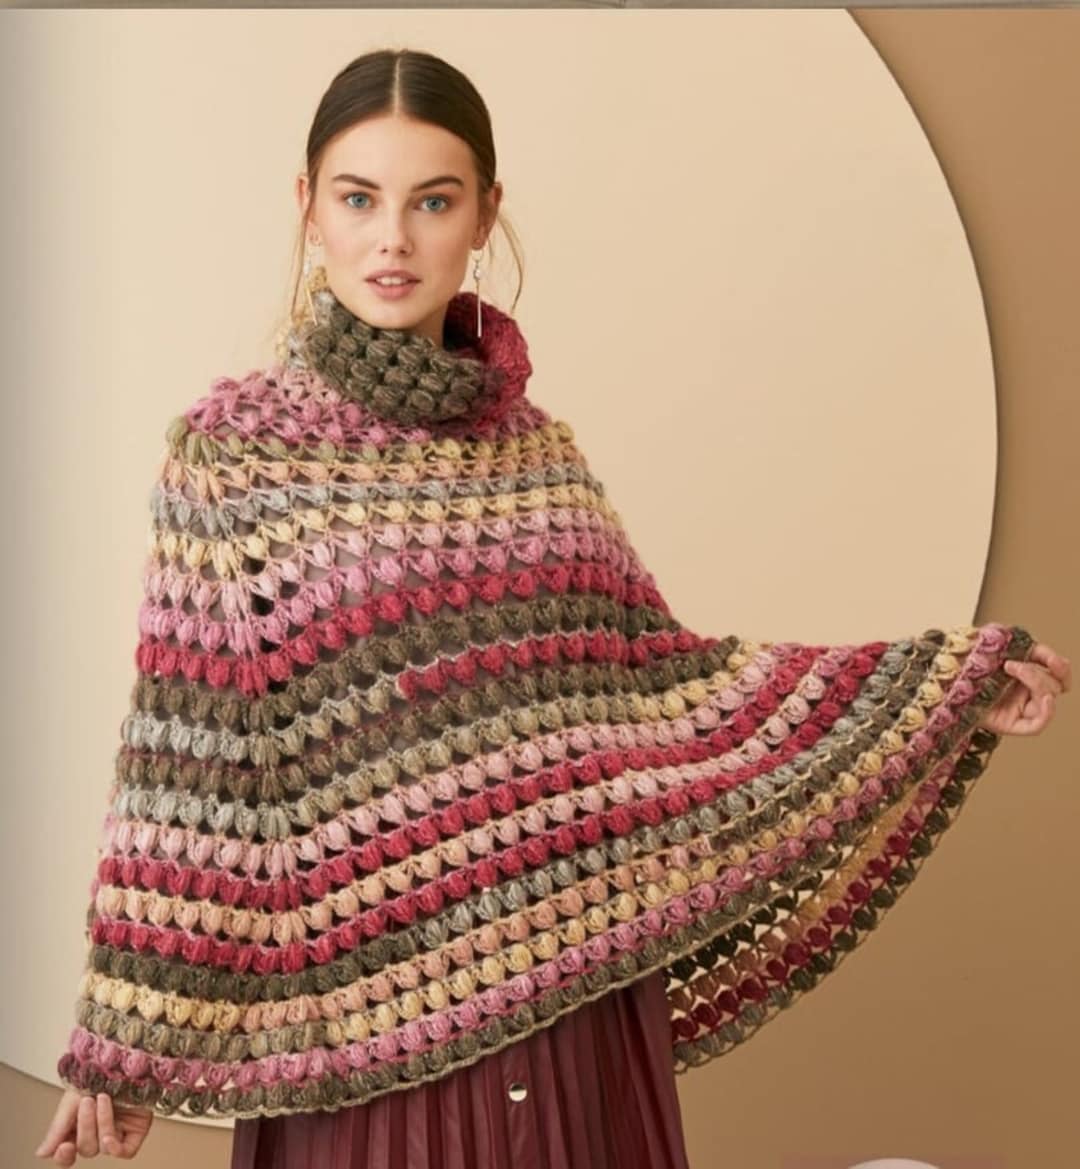 Invitere entanglement Enrich Women's Multicolored Poncho Crochet / Made to Order - Etsy Norway